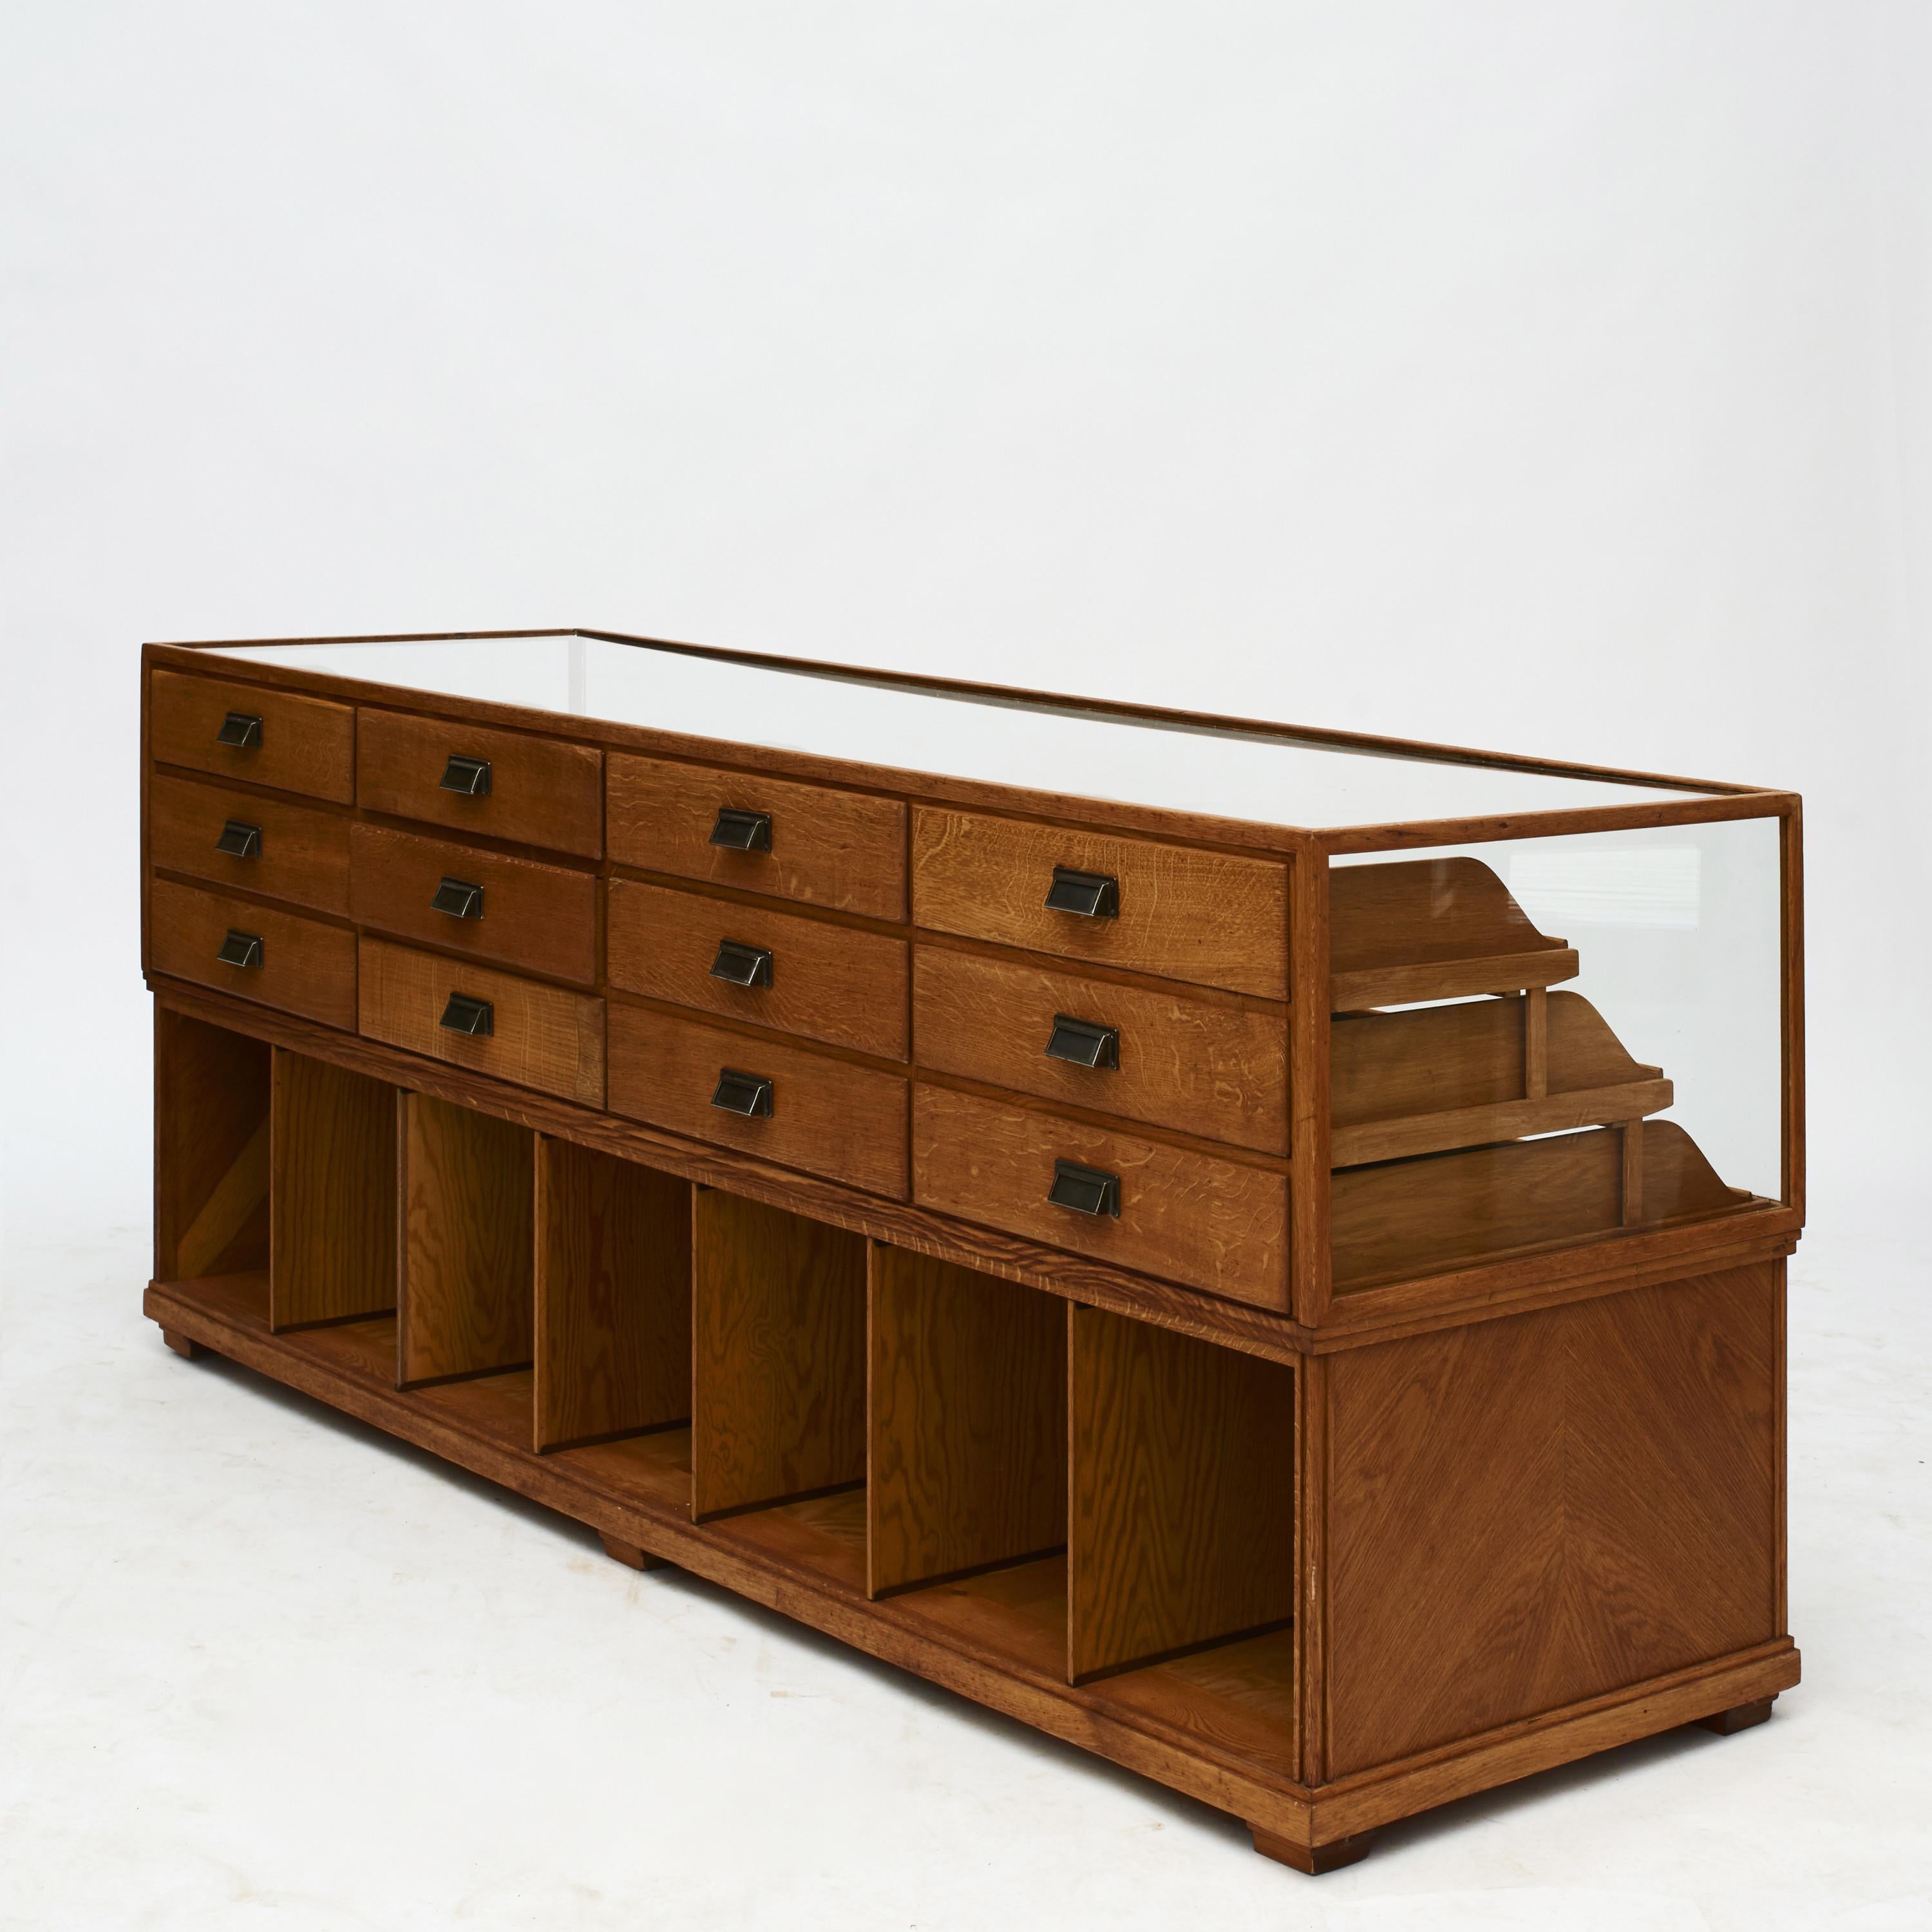 A freestanding counter made in during the 1930s in Denmark. It features an oak frame with a glass top and glass partly covering front and sides. Drawers with original metal handles.

This is a quality shop counter, well suited for displaying